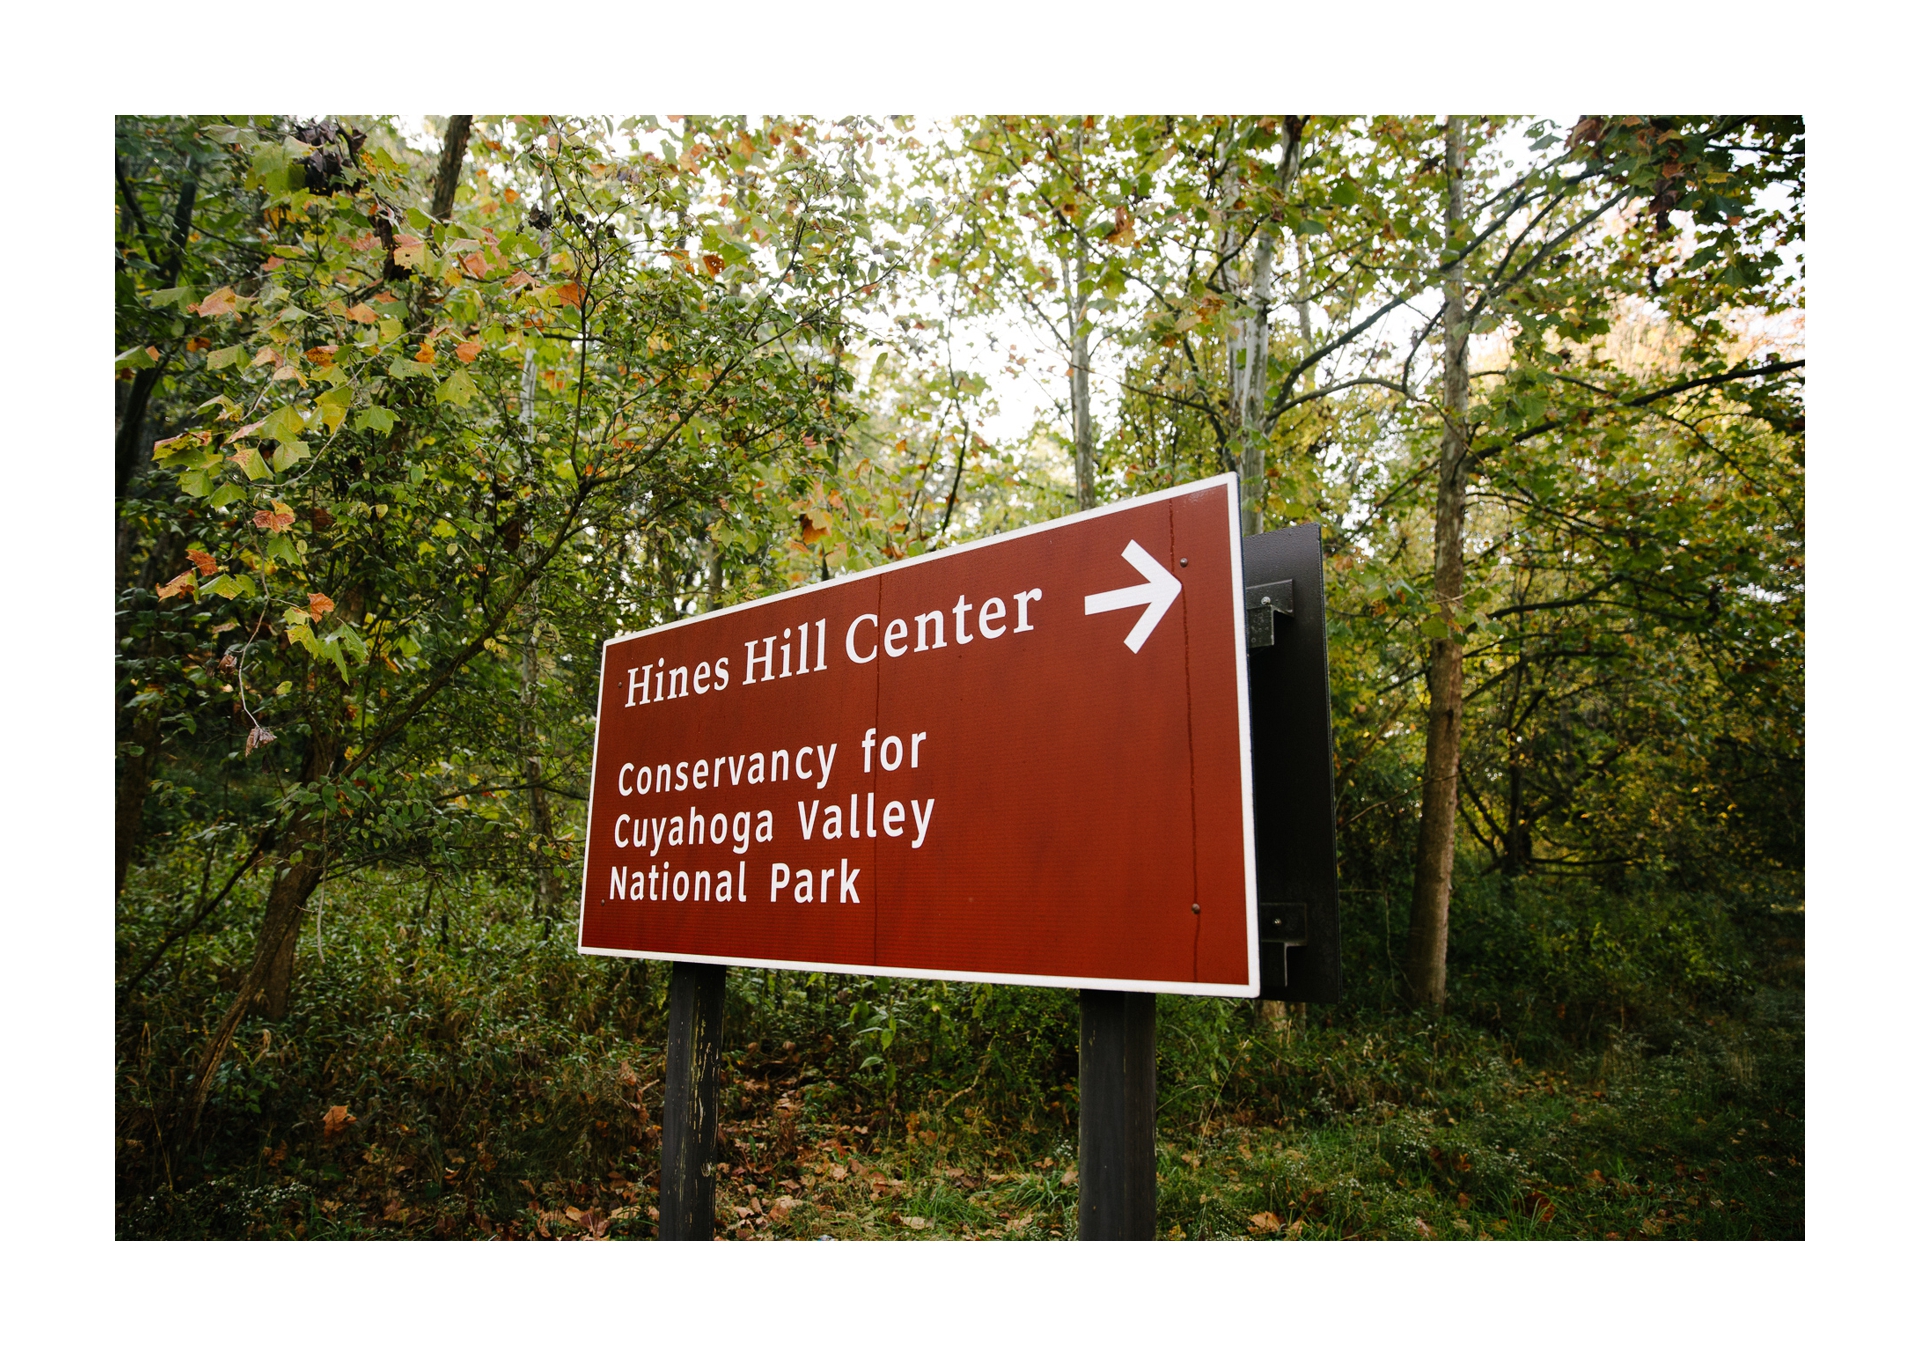 Hines Hill Campus Wedding Photos in Cuyahoga Valley National Park Cleveland 12.jpg